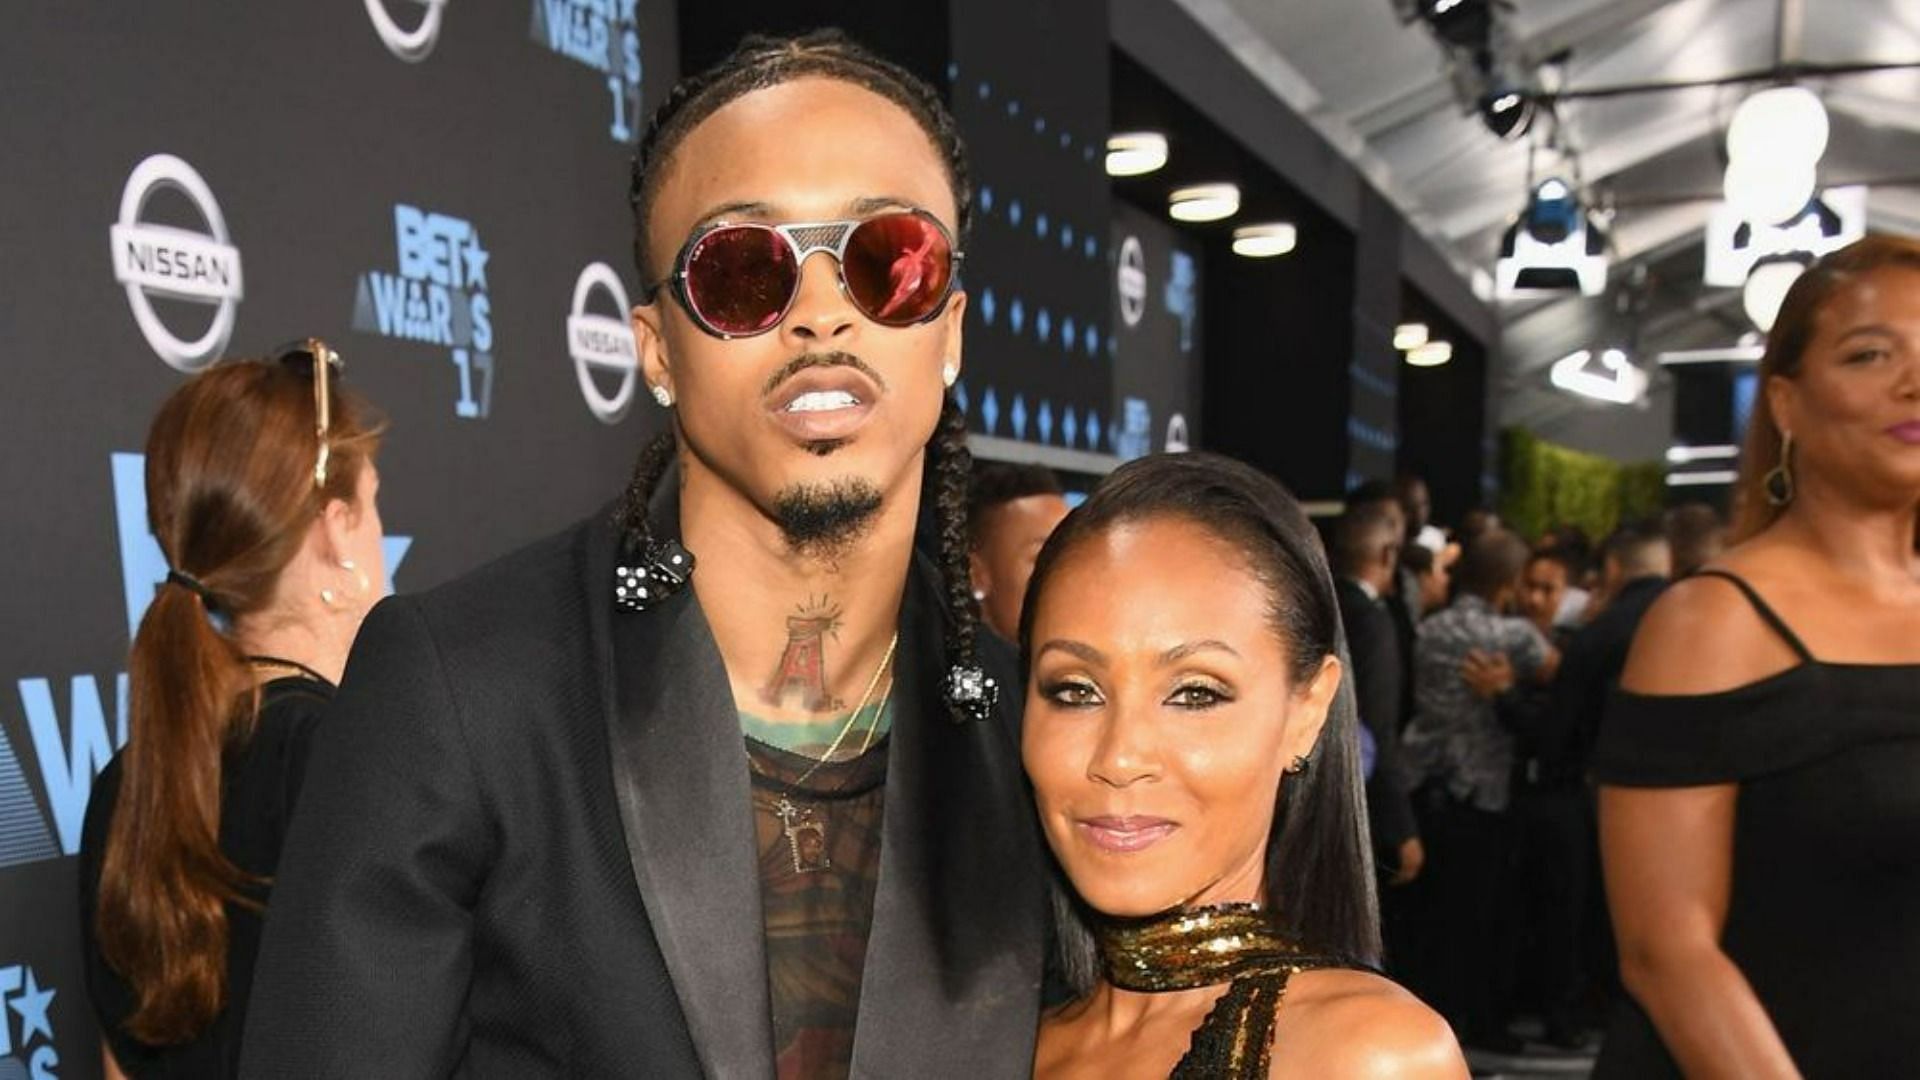 August Alsina releases song about &quot;entanglement&quot; with Jada Pinkett Smith (Image via Paras Griffin/Getty Images)